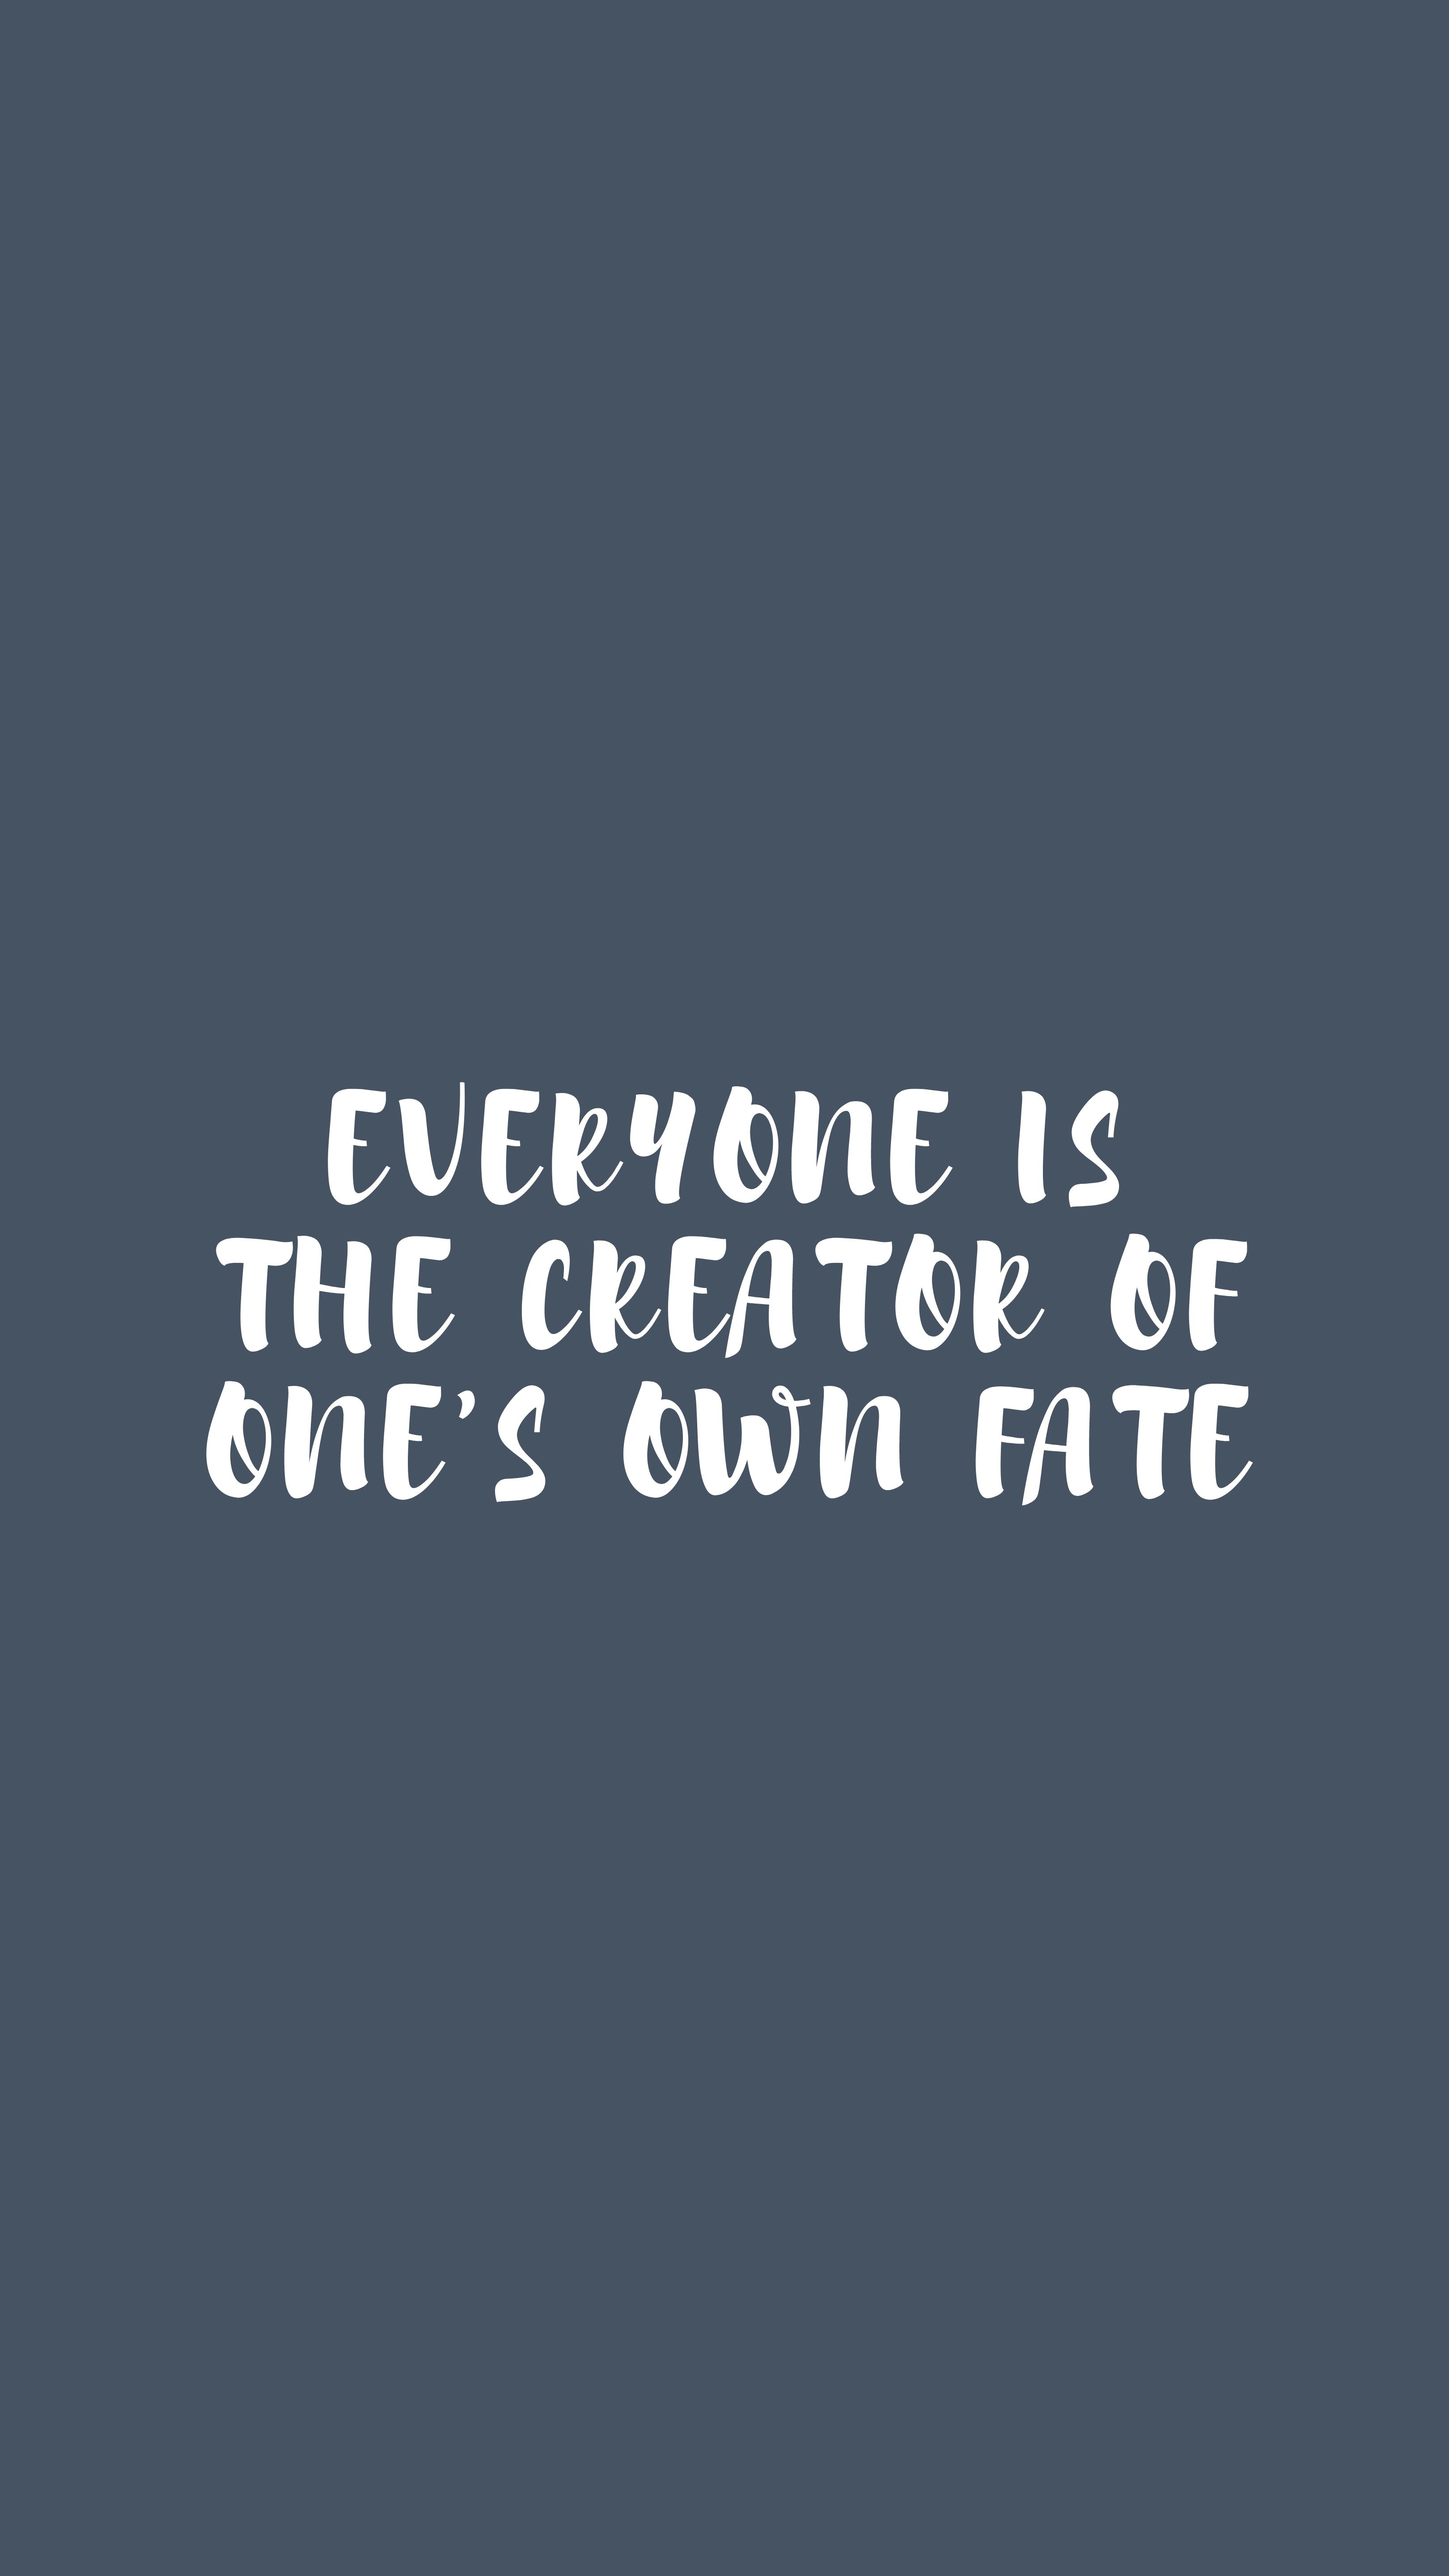 quotation, inspiration, motivation, words, quote, fate